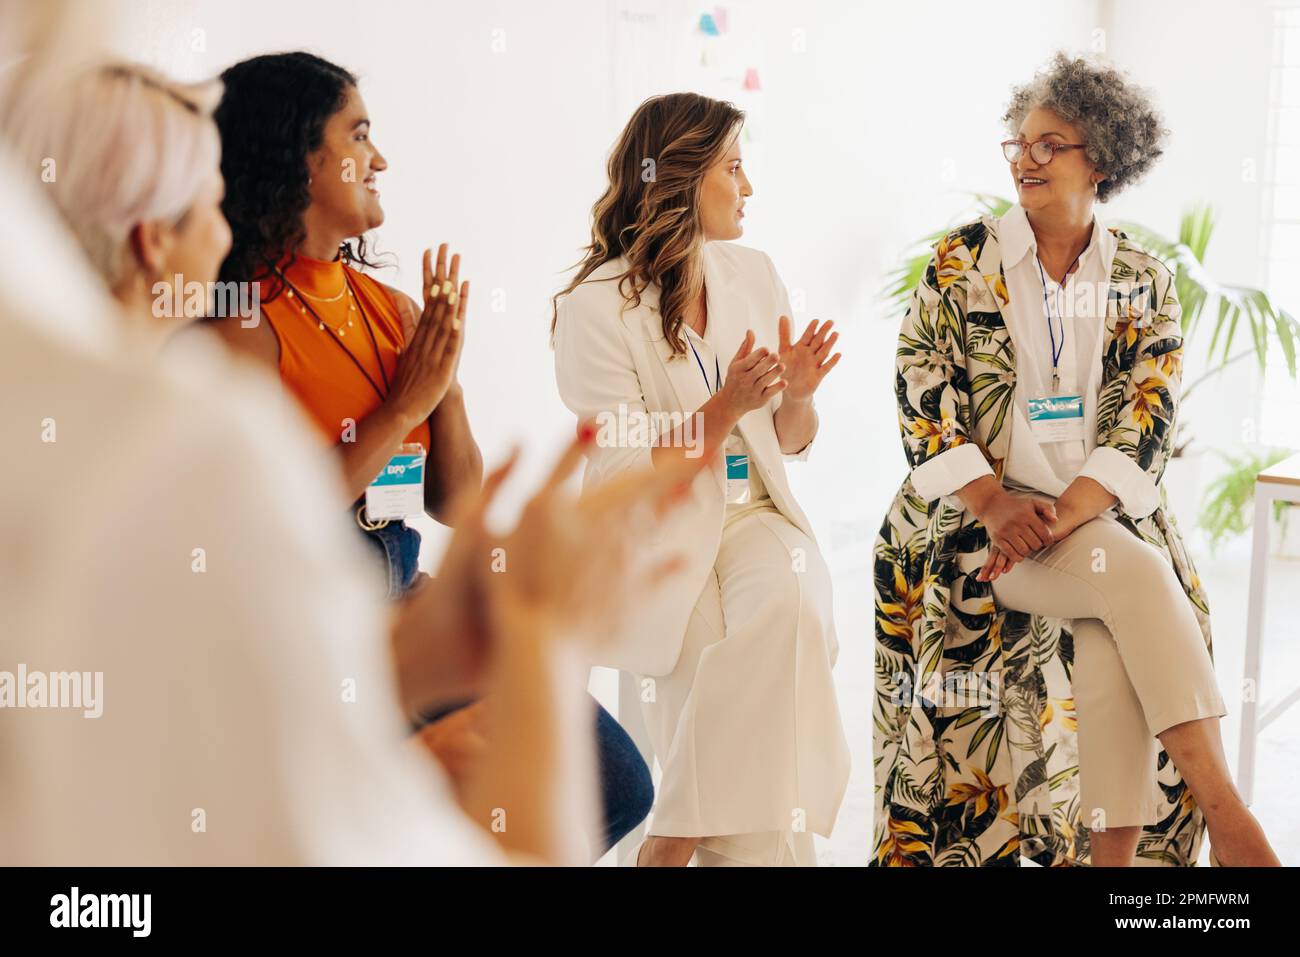 Cheerful businesswomen applauding their colleague during a conference meeting. Group of multicultural businesswomen working together in an all-female Stock Photo